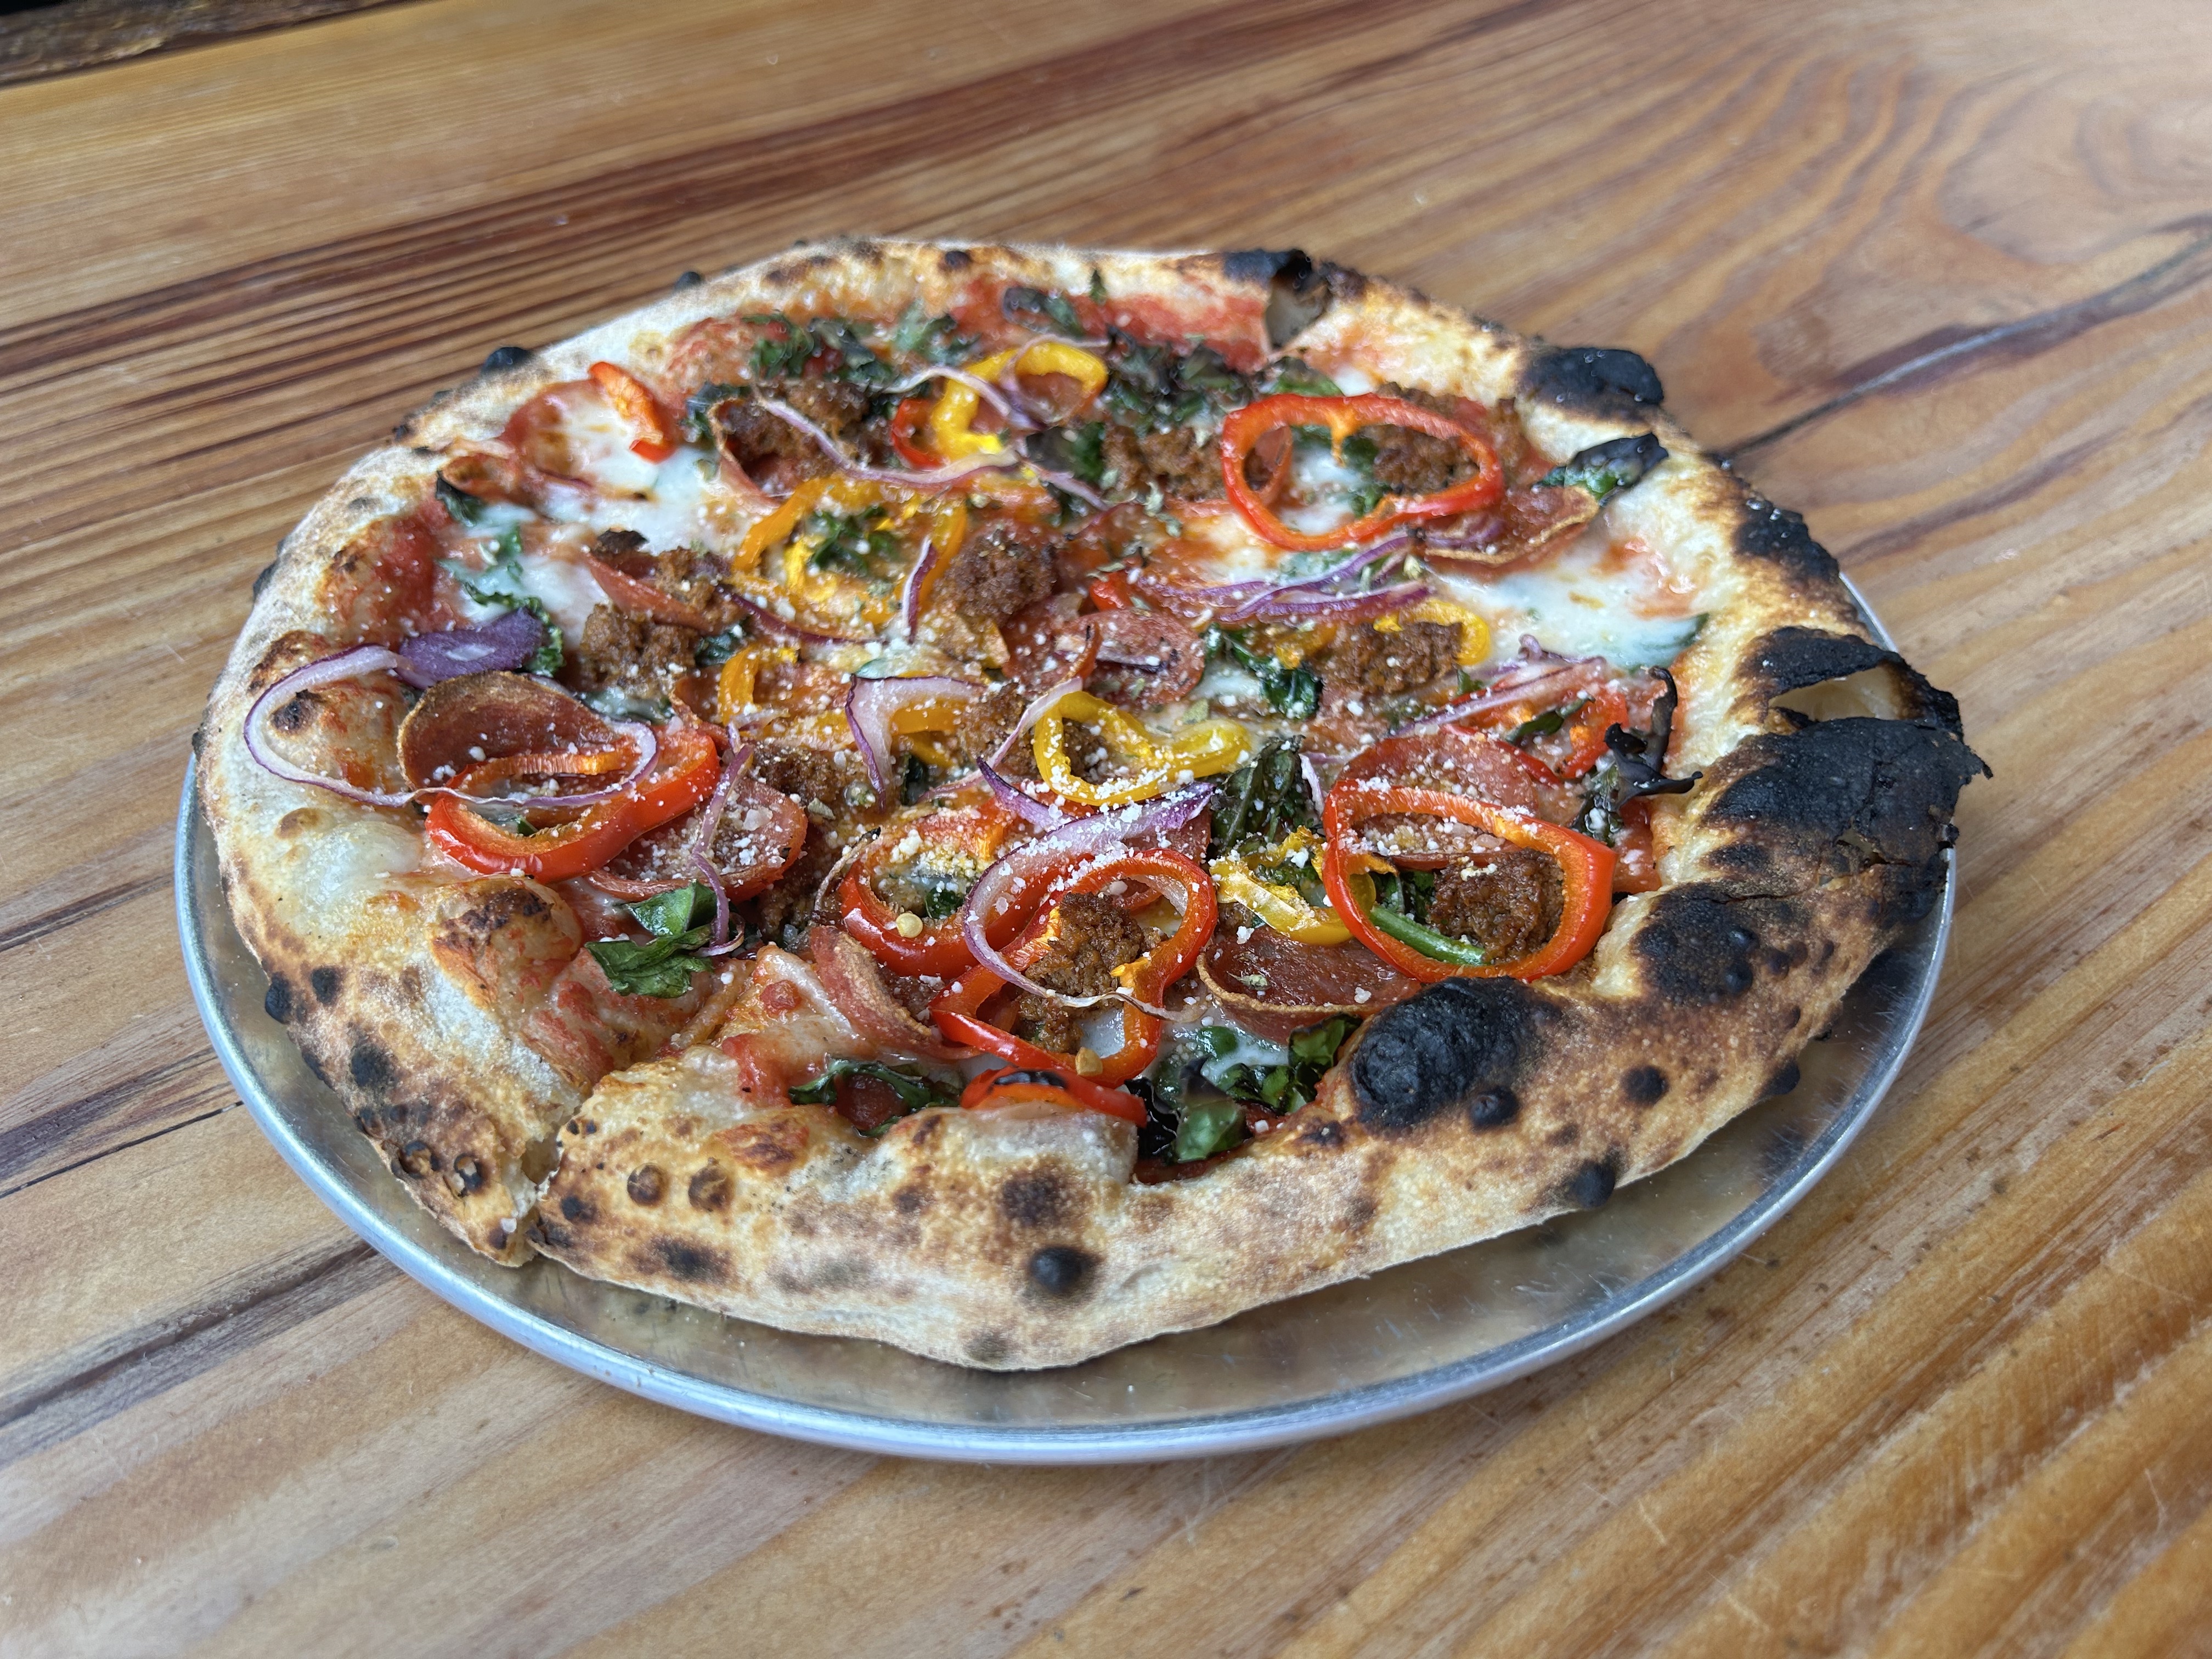 A pizza with house-made cheese, pepperoni, and house-made chorizo at Living Haus in Portland, Oregon.